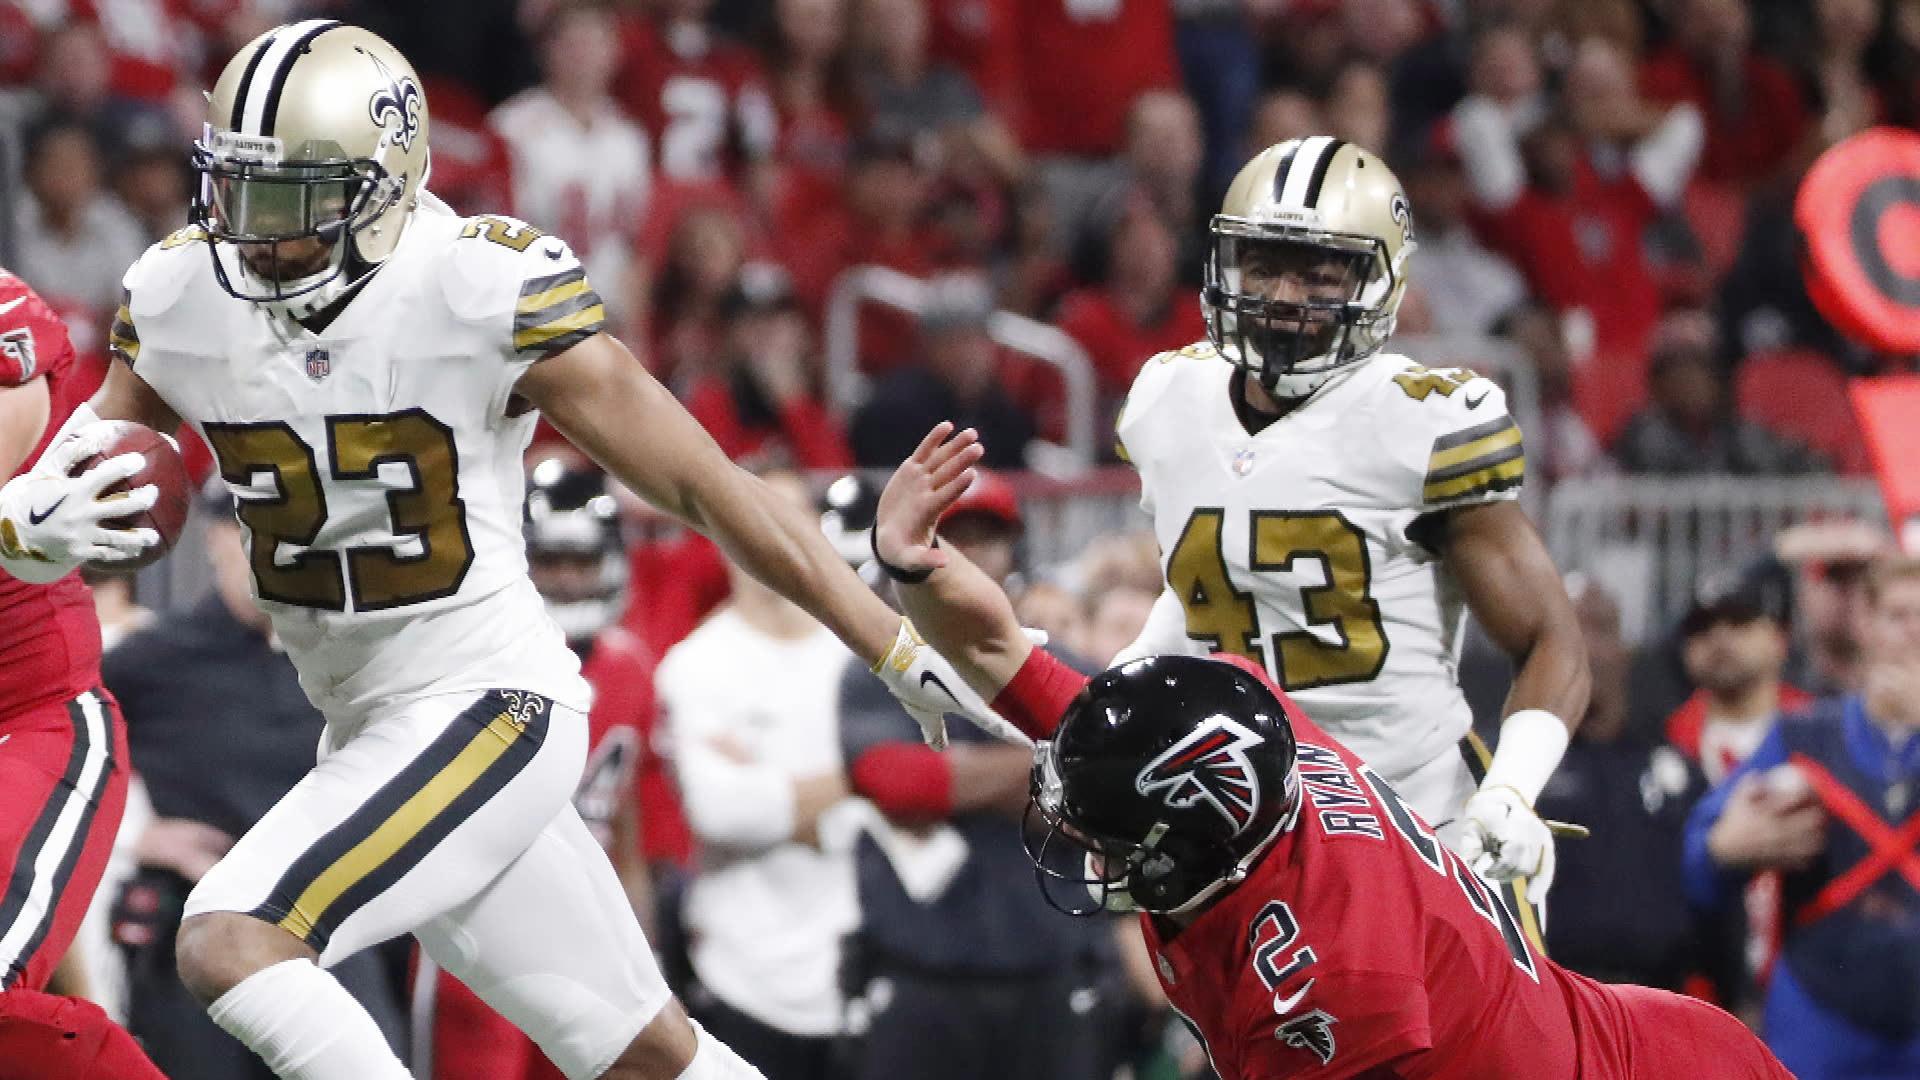 Marshon Lattimore: Practicing against Drew Brees made me a better